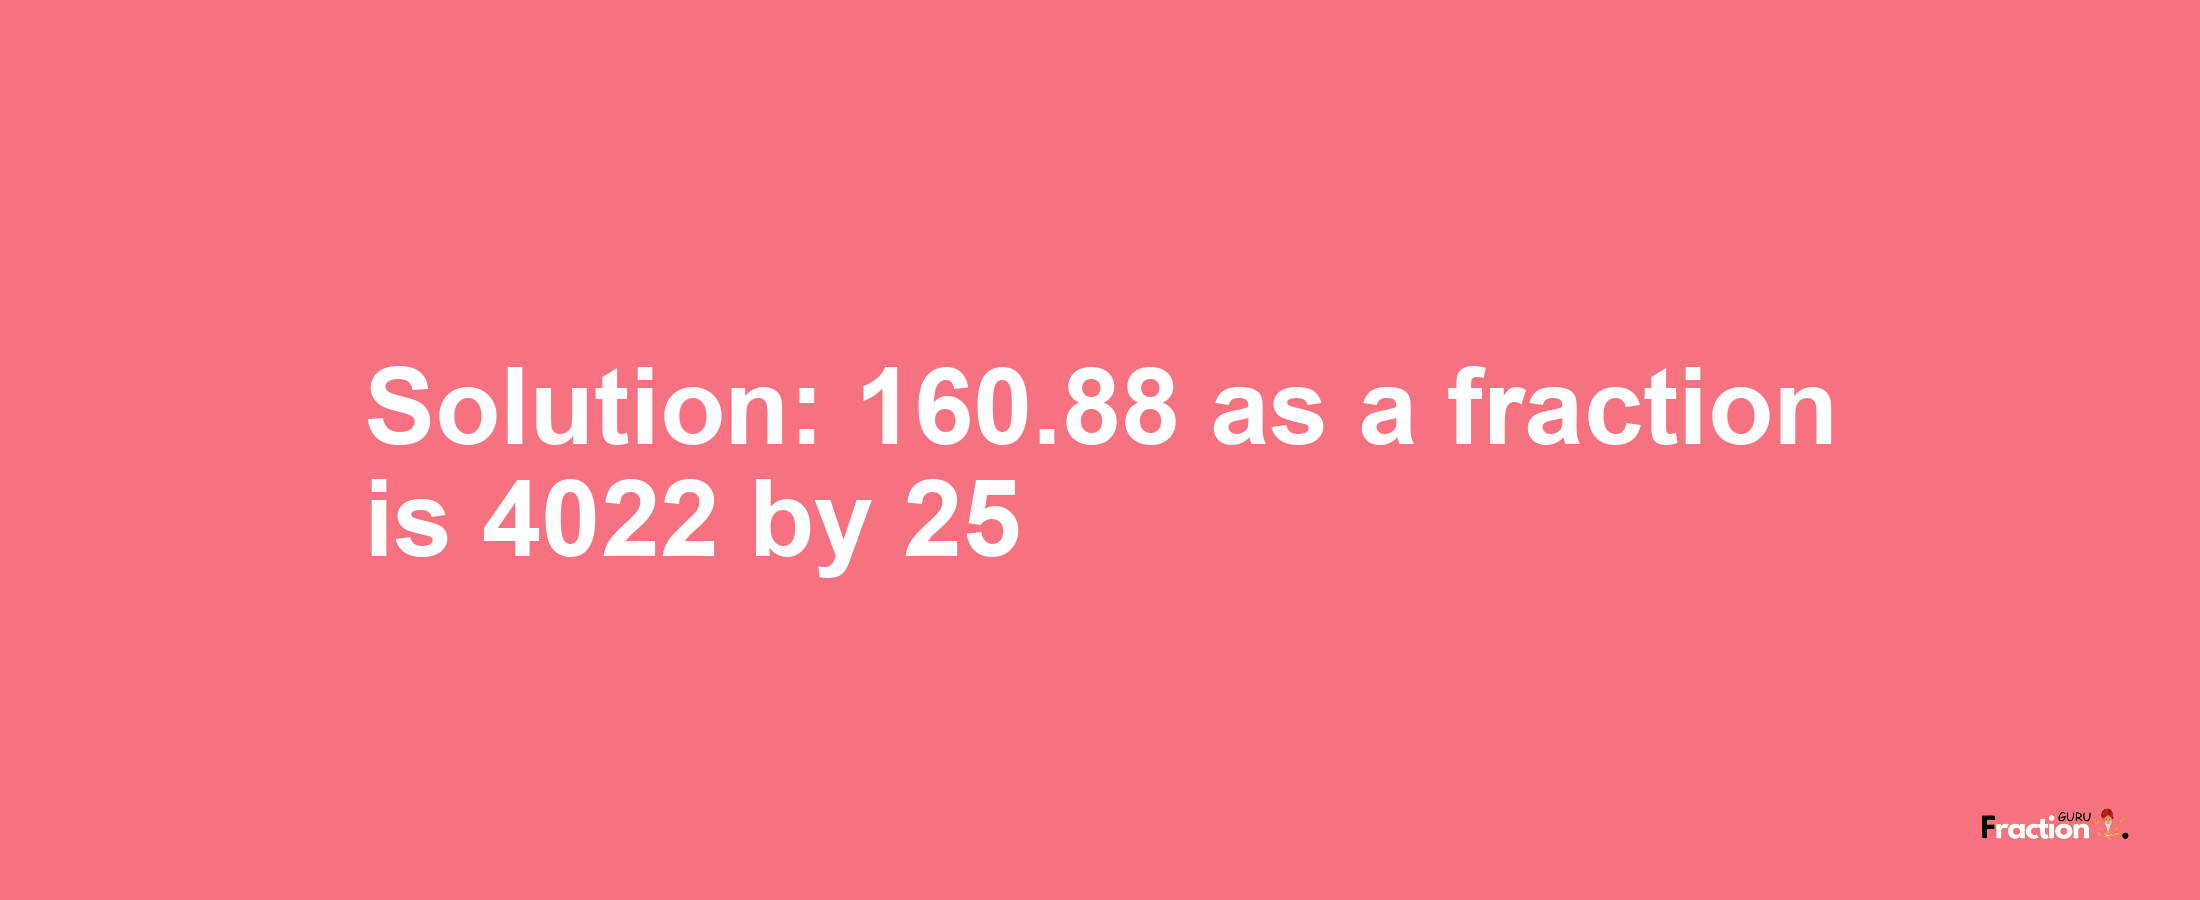 Solution:160.88 as a fraction is 4022/25